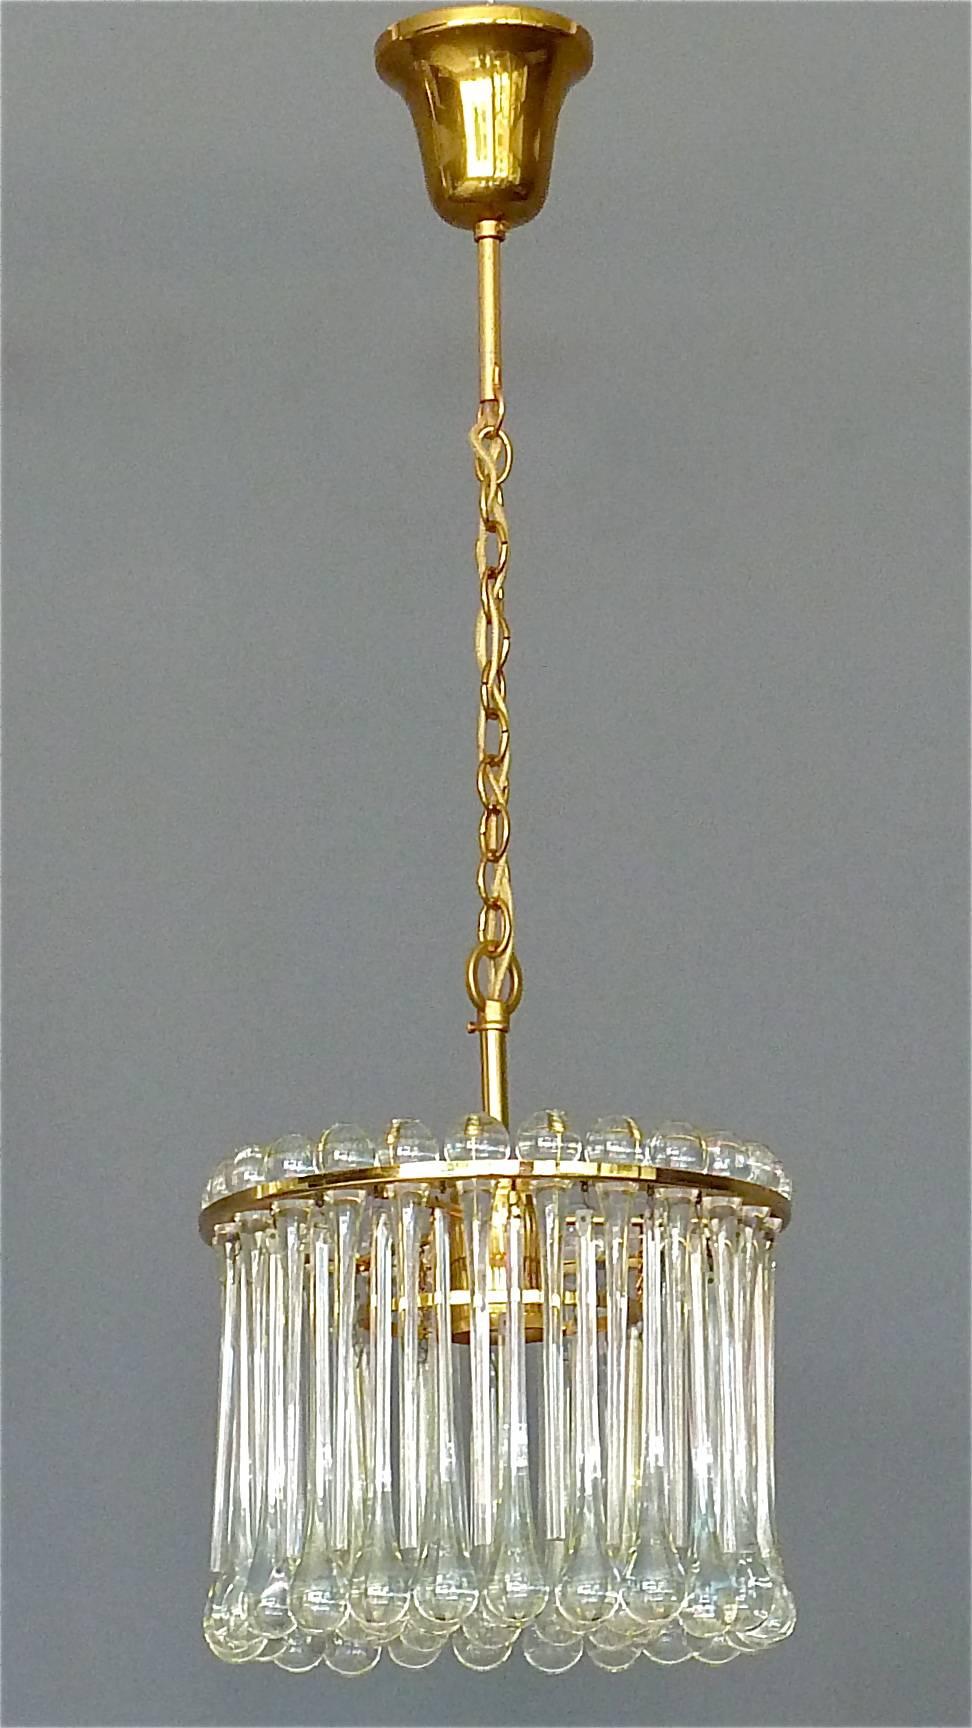 Signed Palwa Chandelier Gilt Brass Murano Crystal Glass Drops 1960s Venini Style For Sale 2